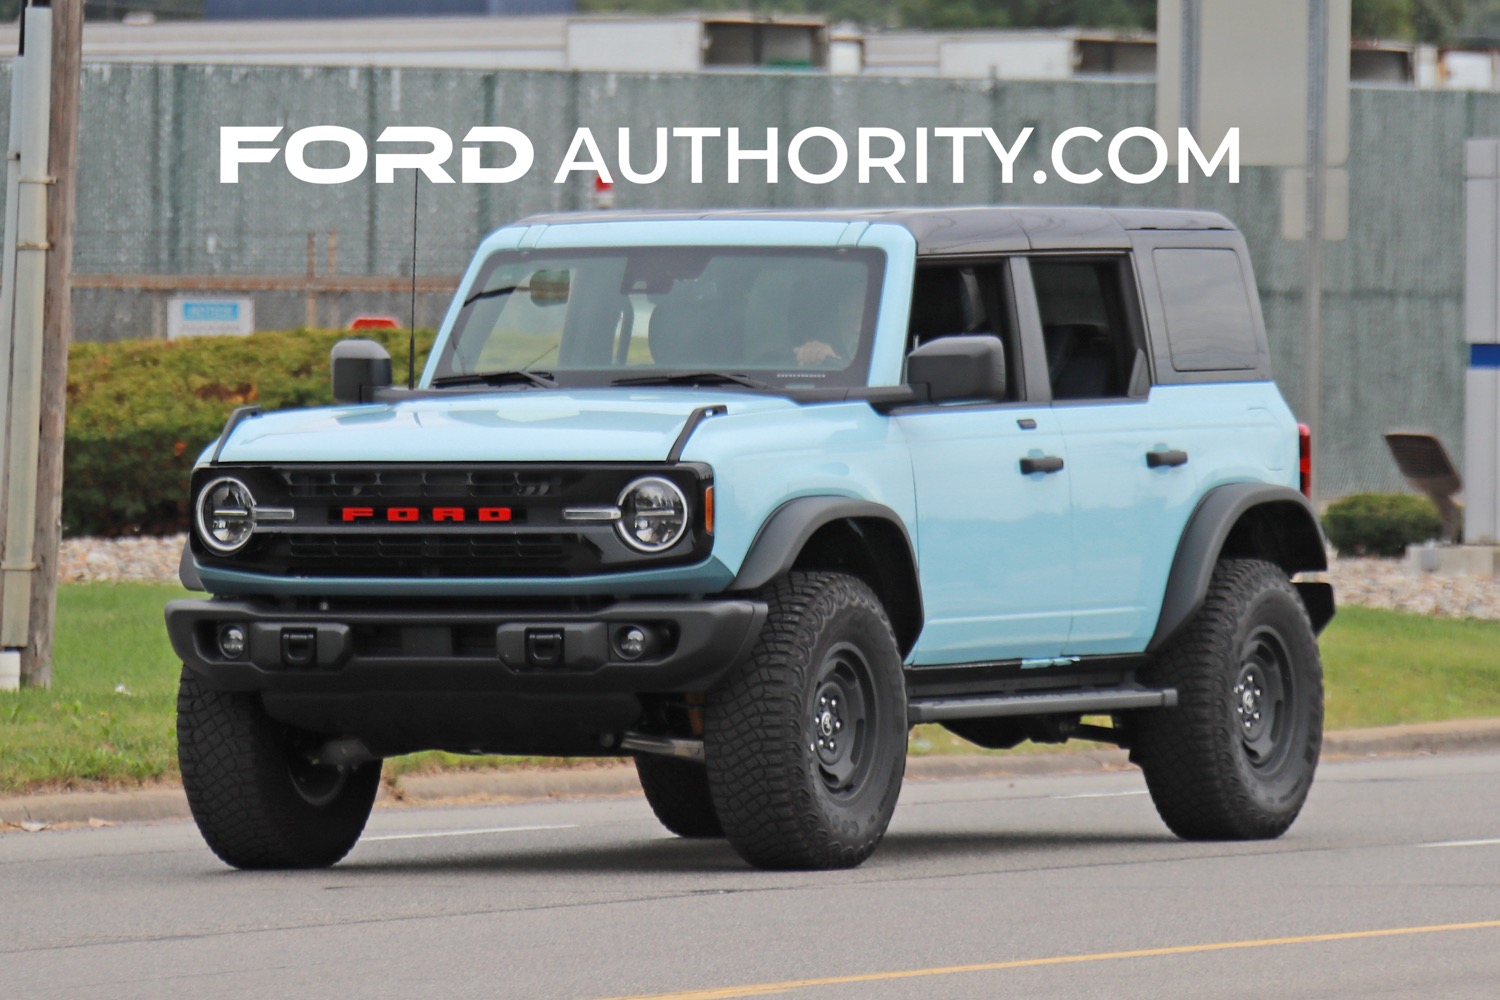 Ford Bronco Robin's Egg Blue + Black Grill + Black Painted MOD Top Bronco Heritage Spotted 2023-Ford-Bronco-Prototype-Spy-Shots-Robins-Egg-Blue-Potential-Heritage-Edition-with-Black-Acc